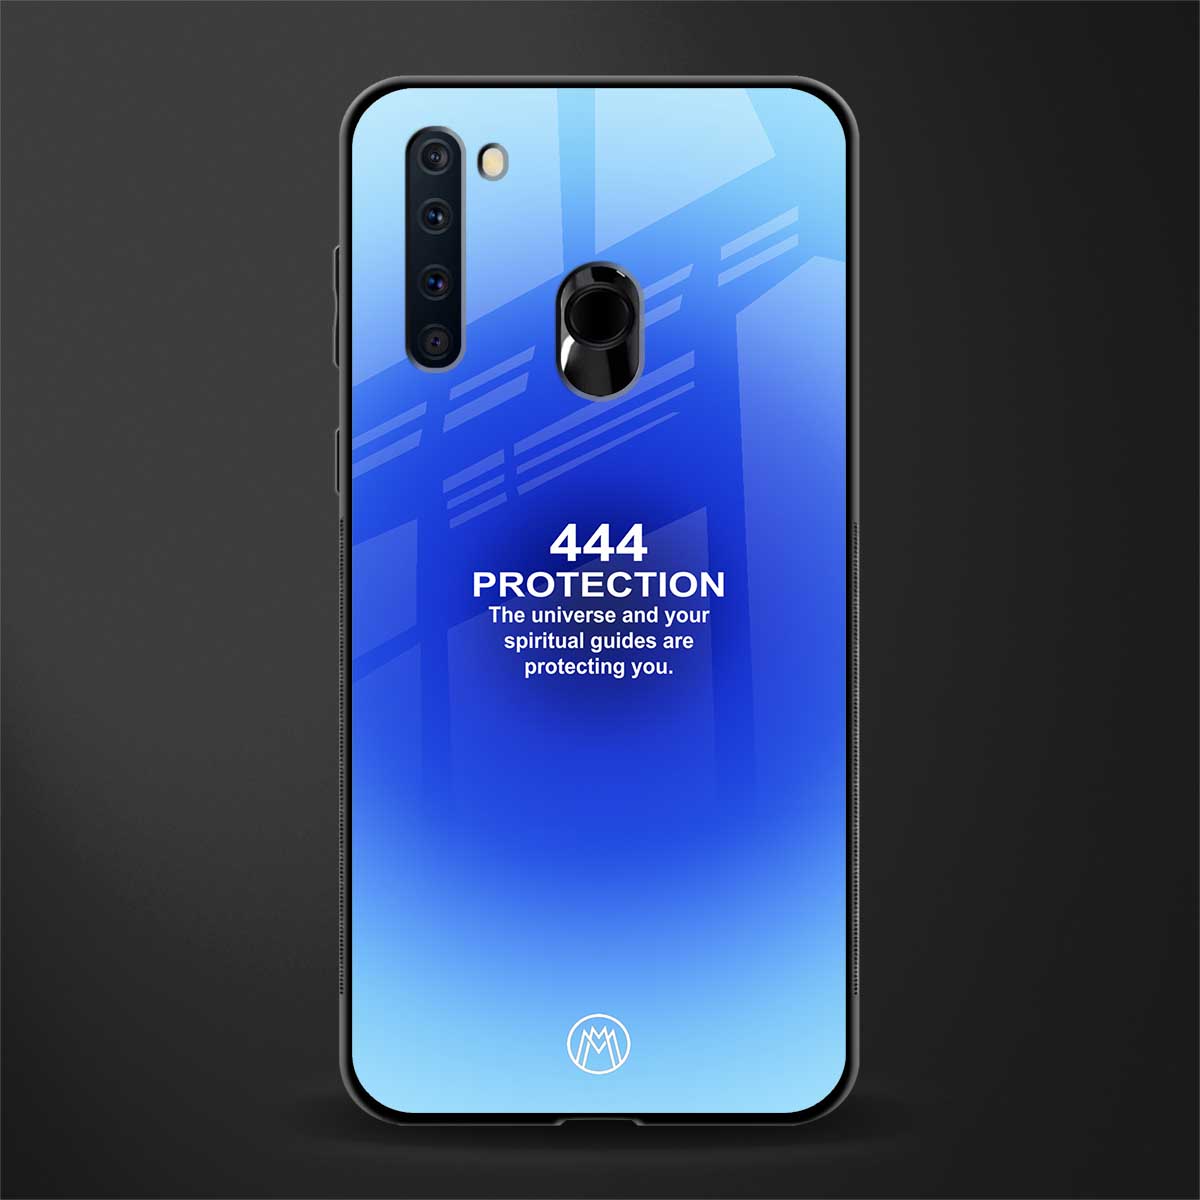 444 protection glass case for samsung a21 image